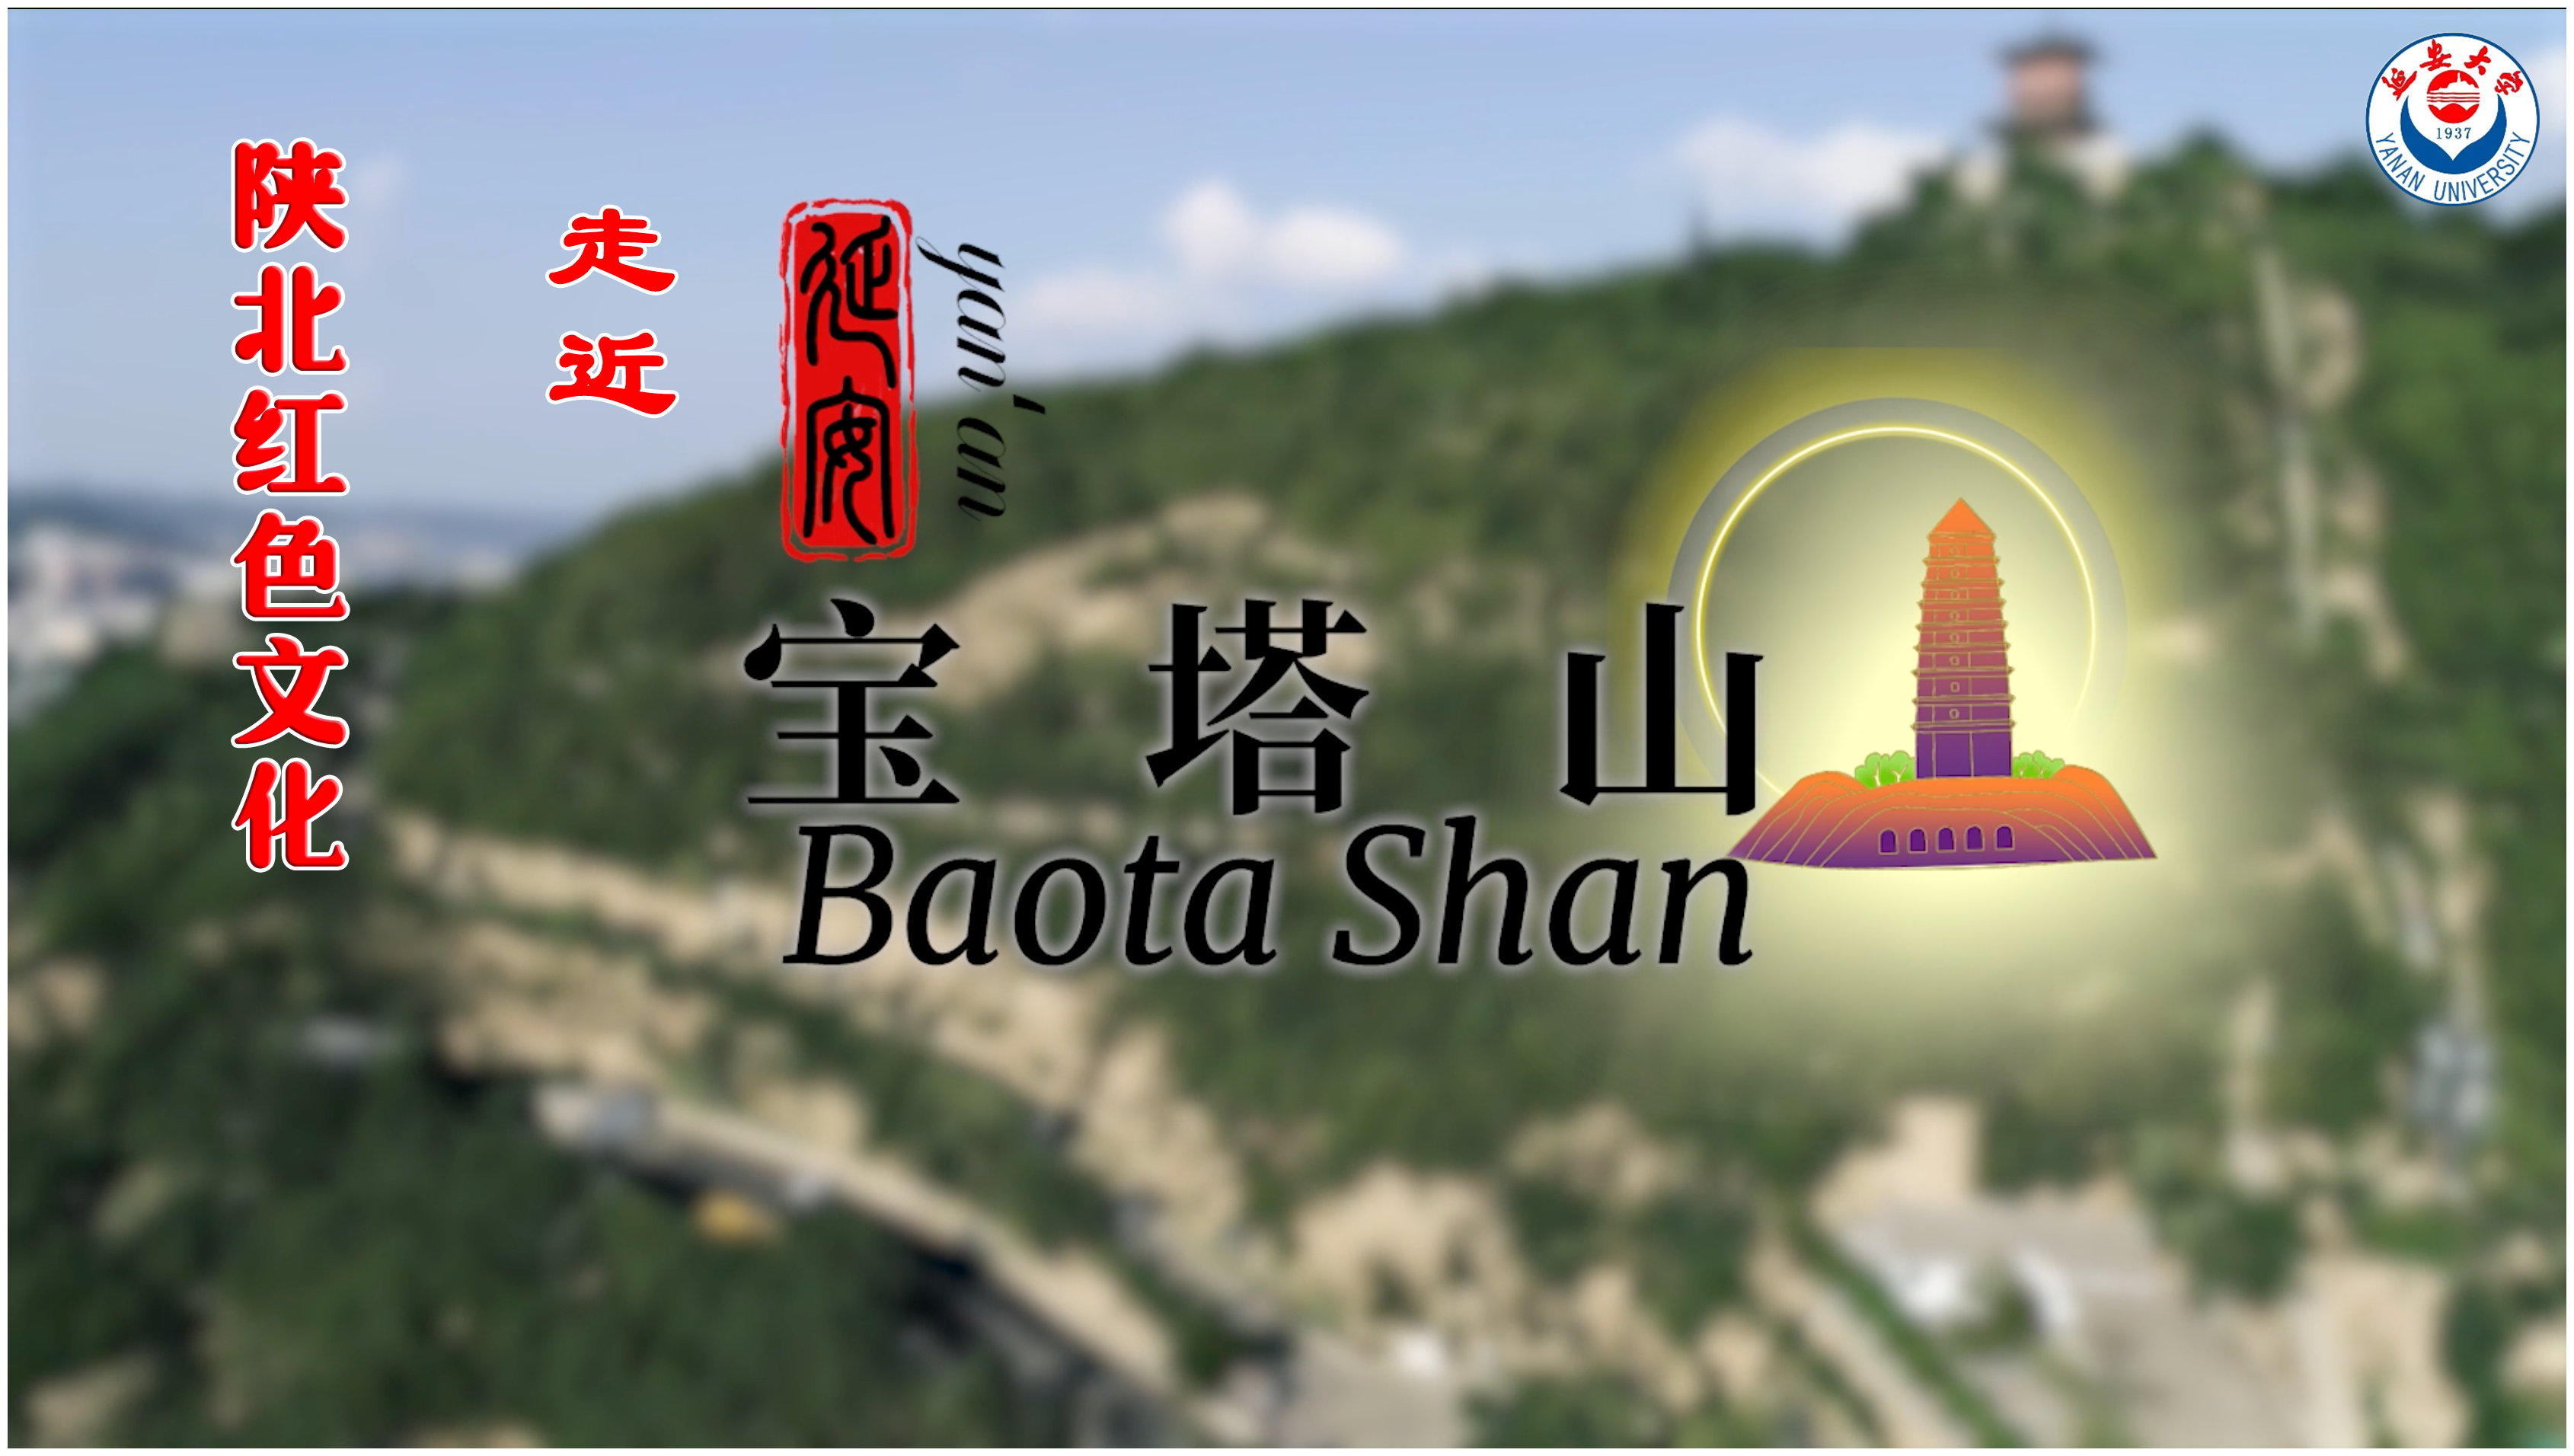 The symbol of the red culture in northern Shaanxi: Baota Mountain